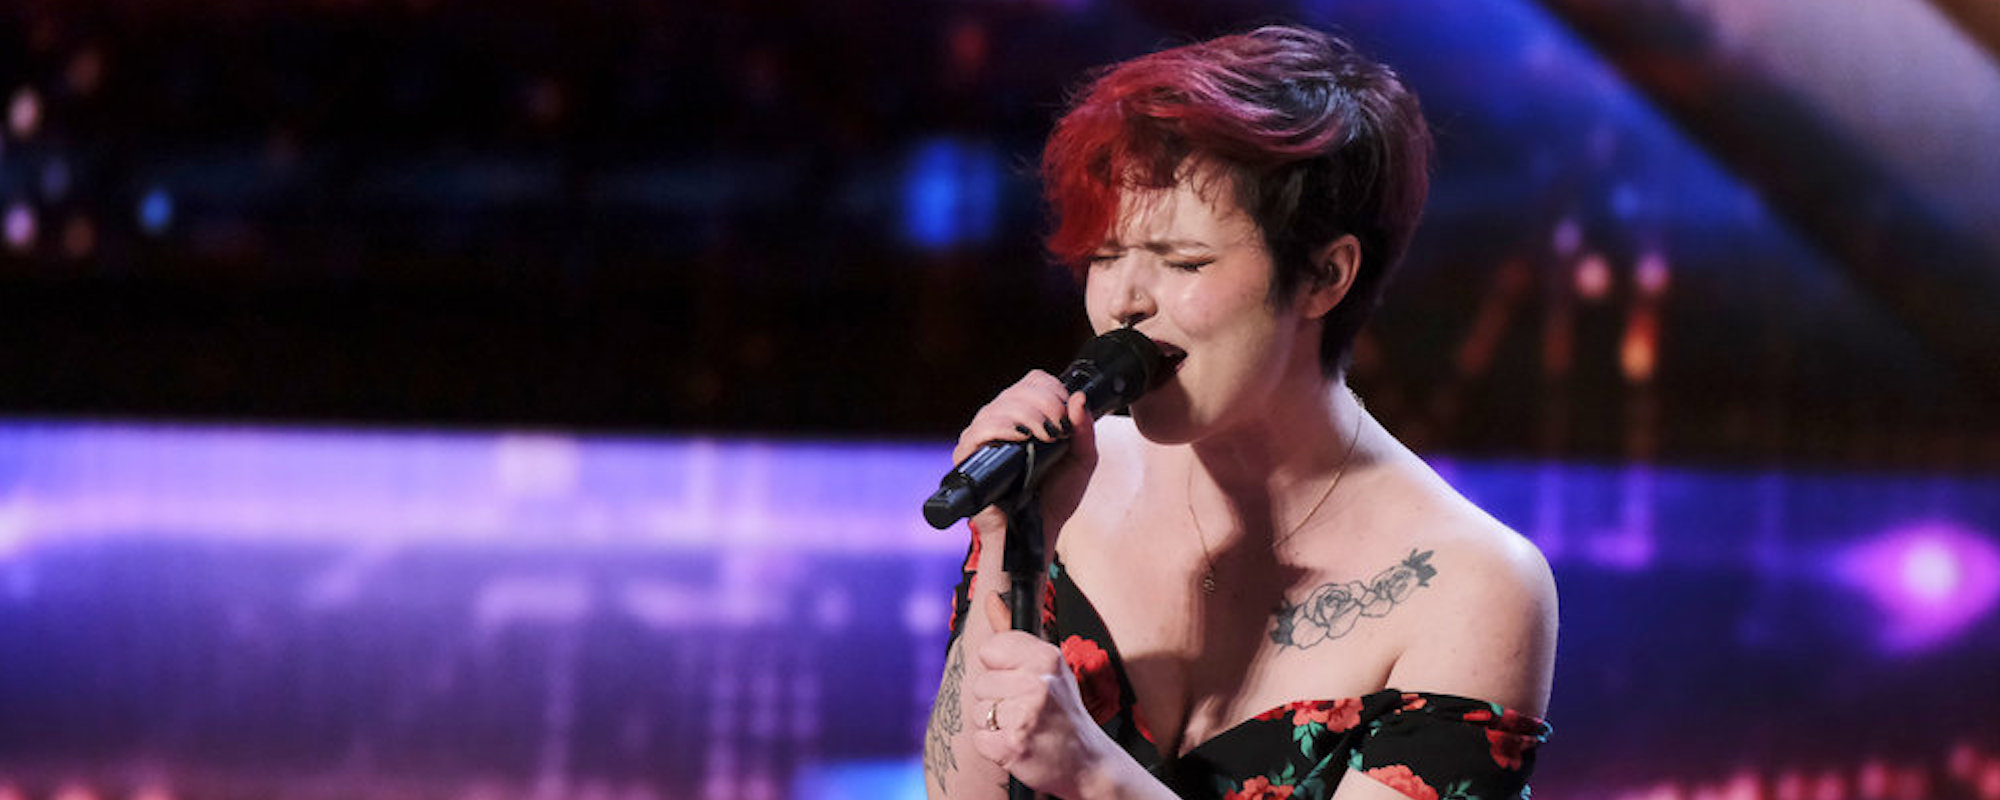 ‘America’s Got Talent’ Judge Predicts Singer Aubrey Burchell May Win Competition